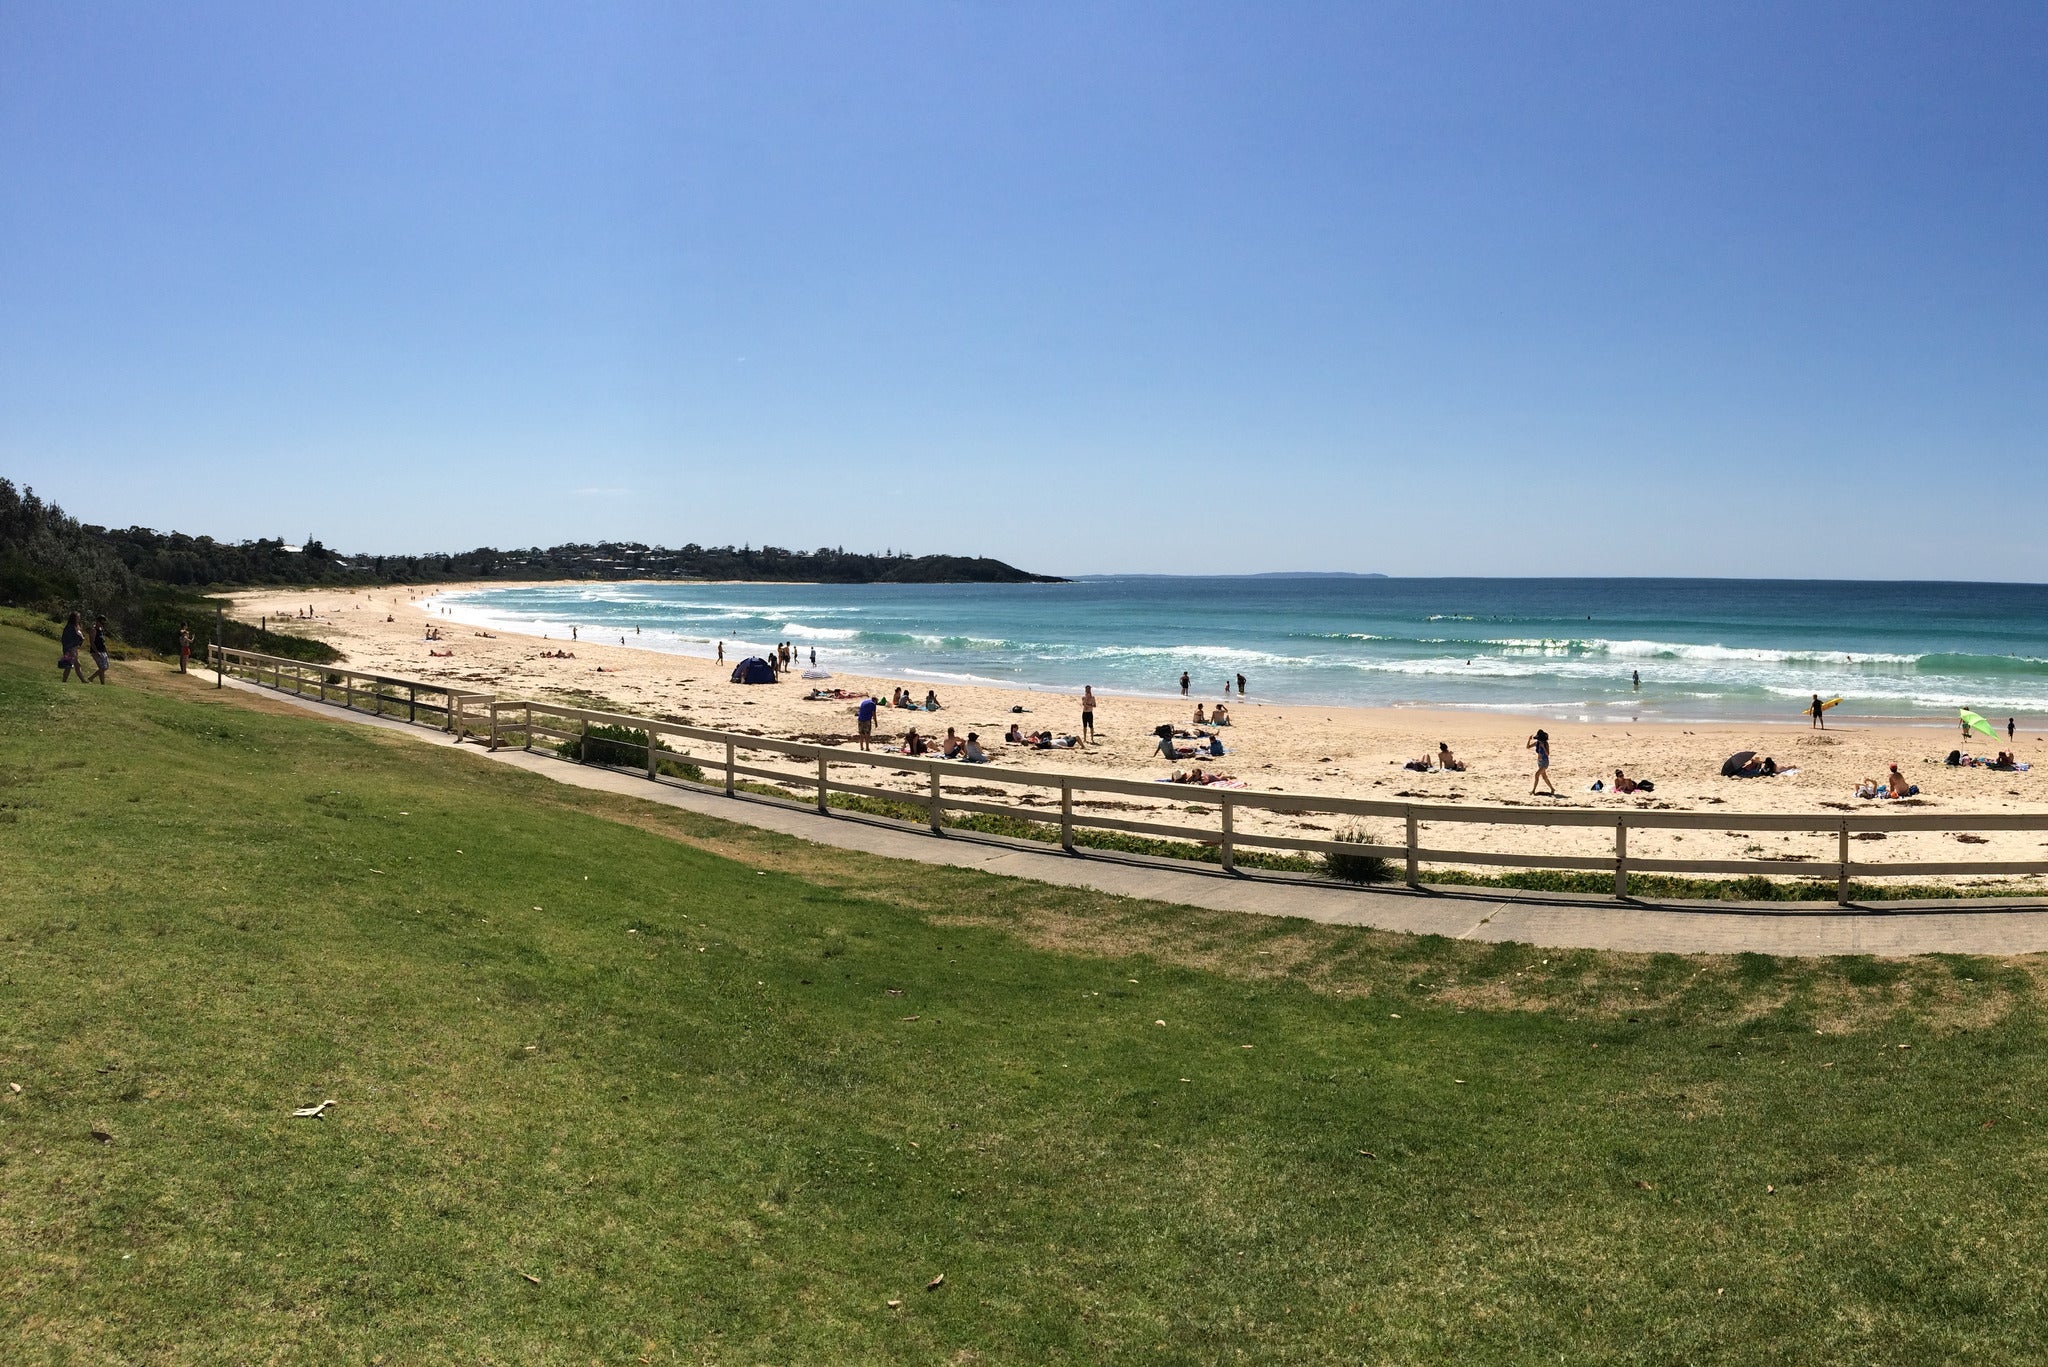 Mollymook Beach, New South Wales, where the attack took place